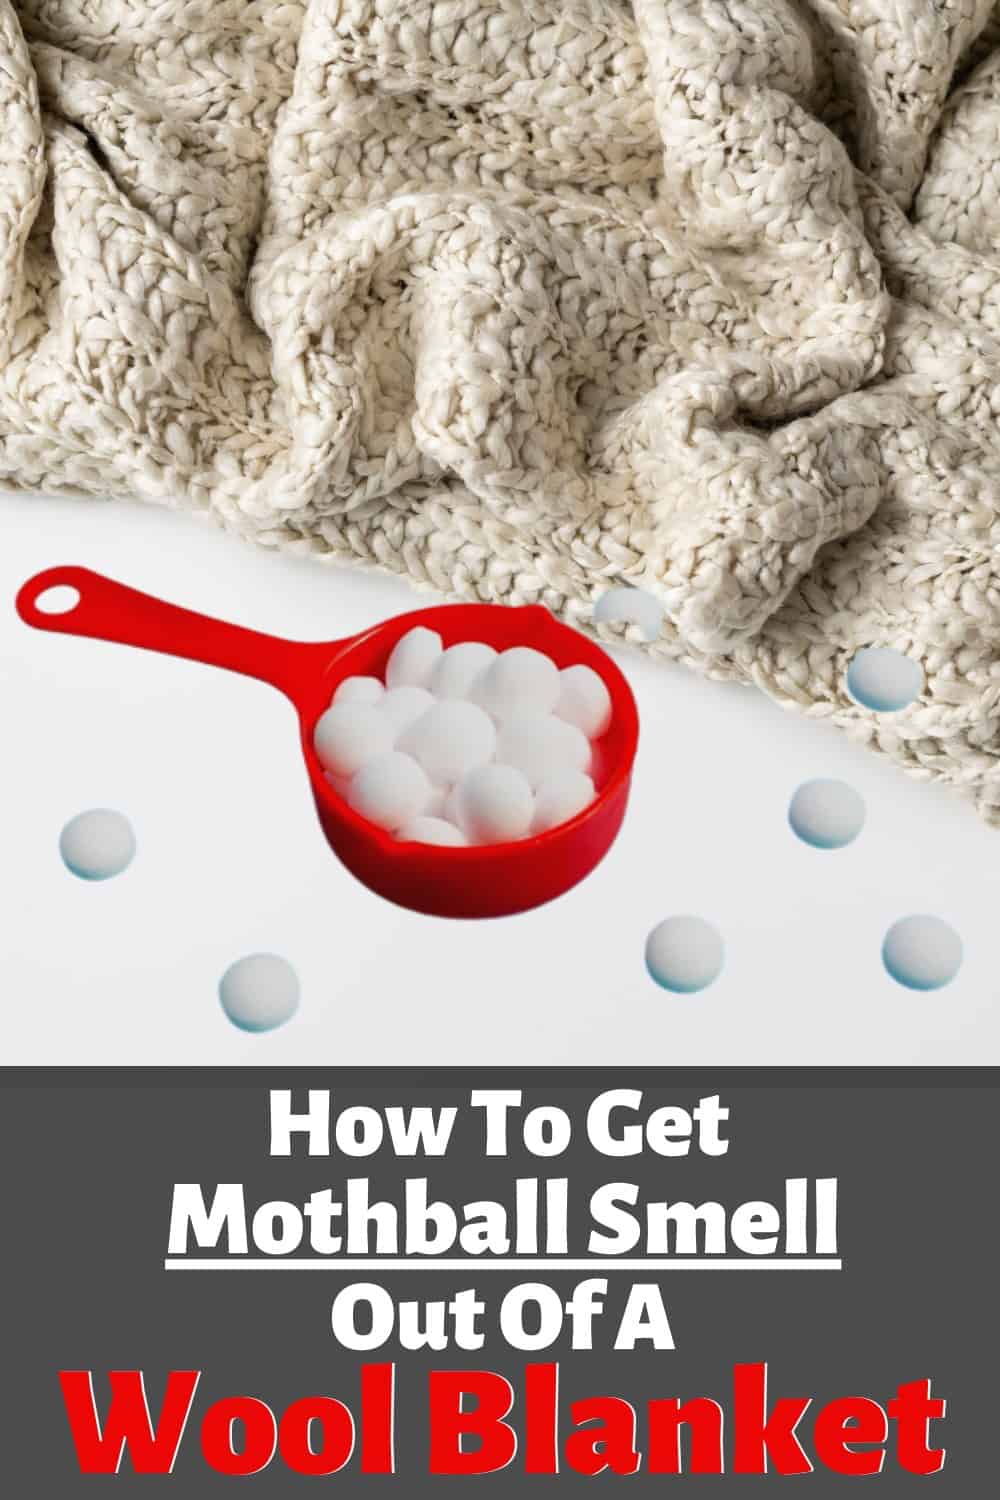 Hang your wool blanket in a well-ventilated area to air out the mothball smell